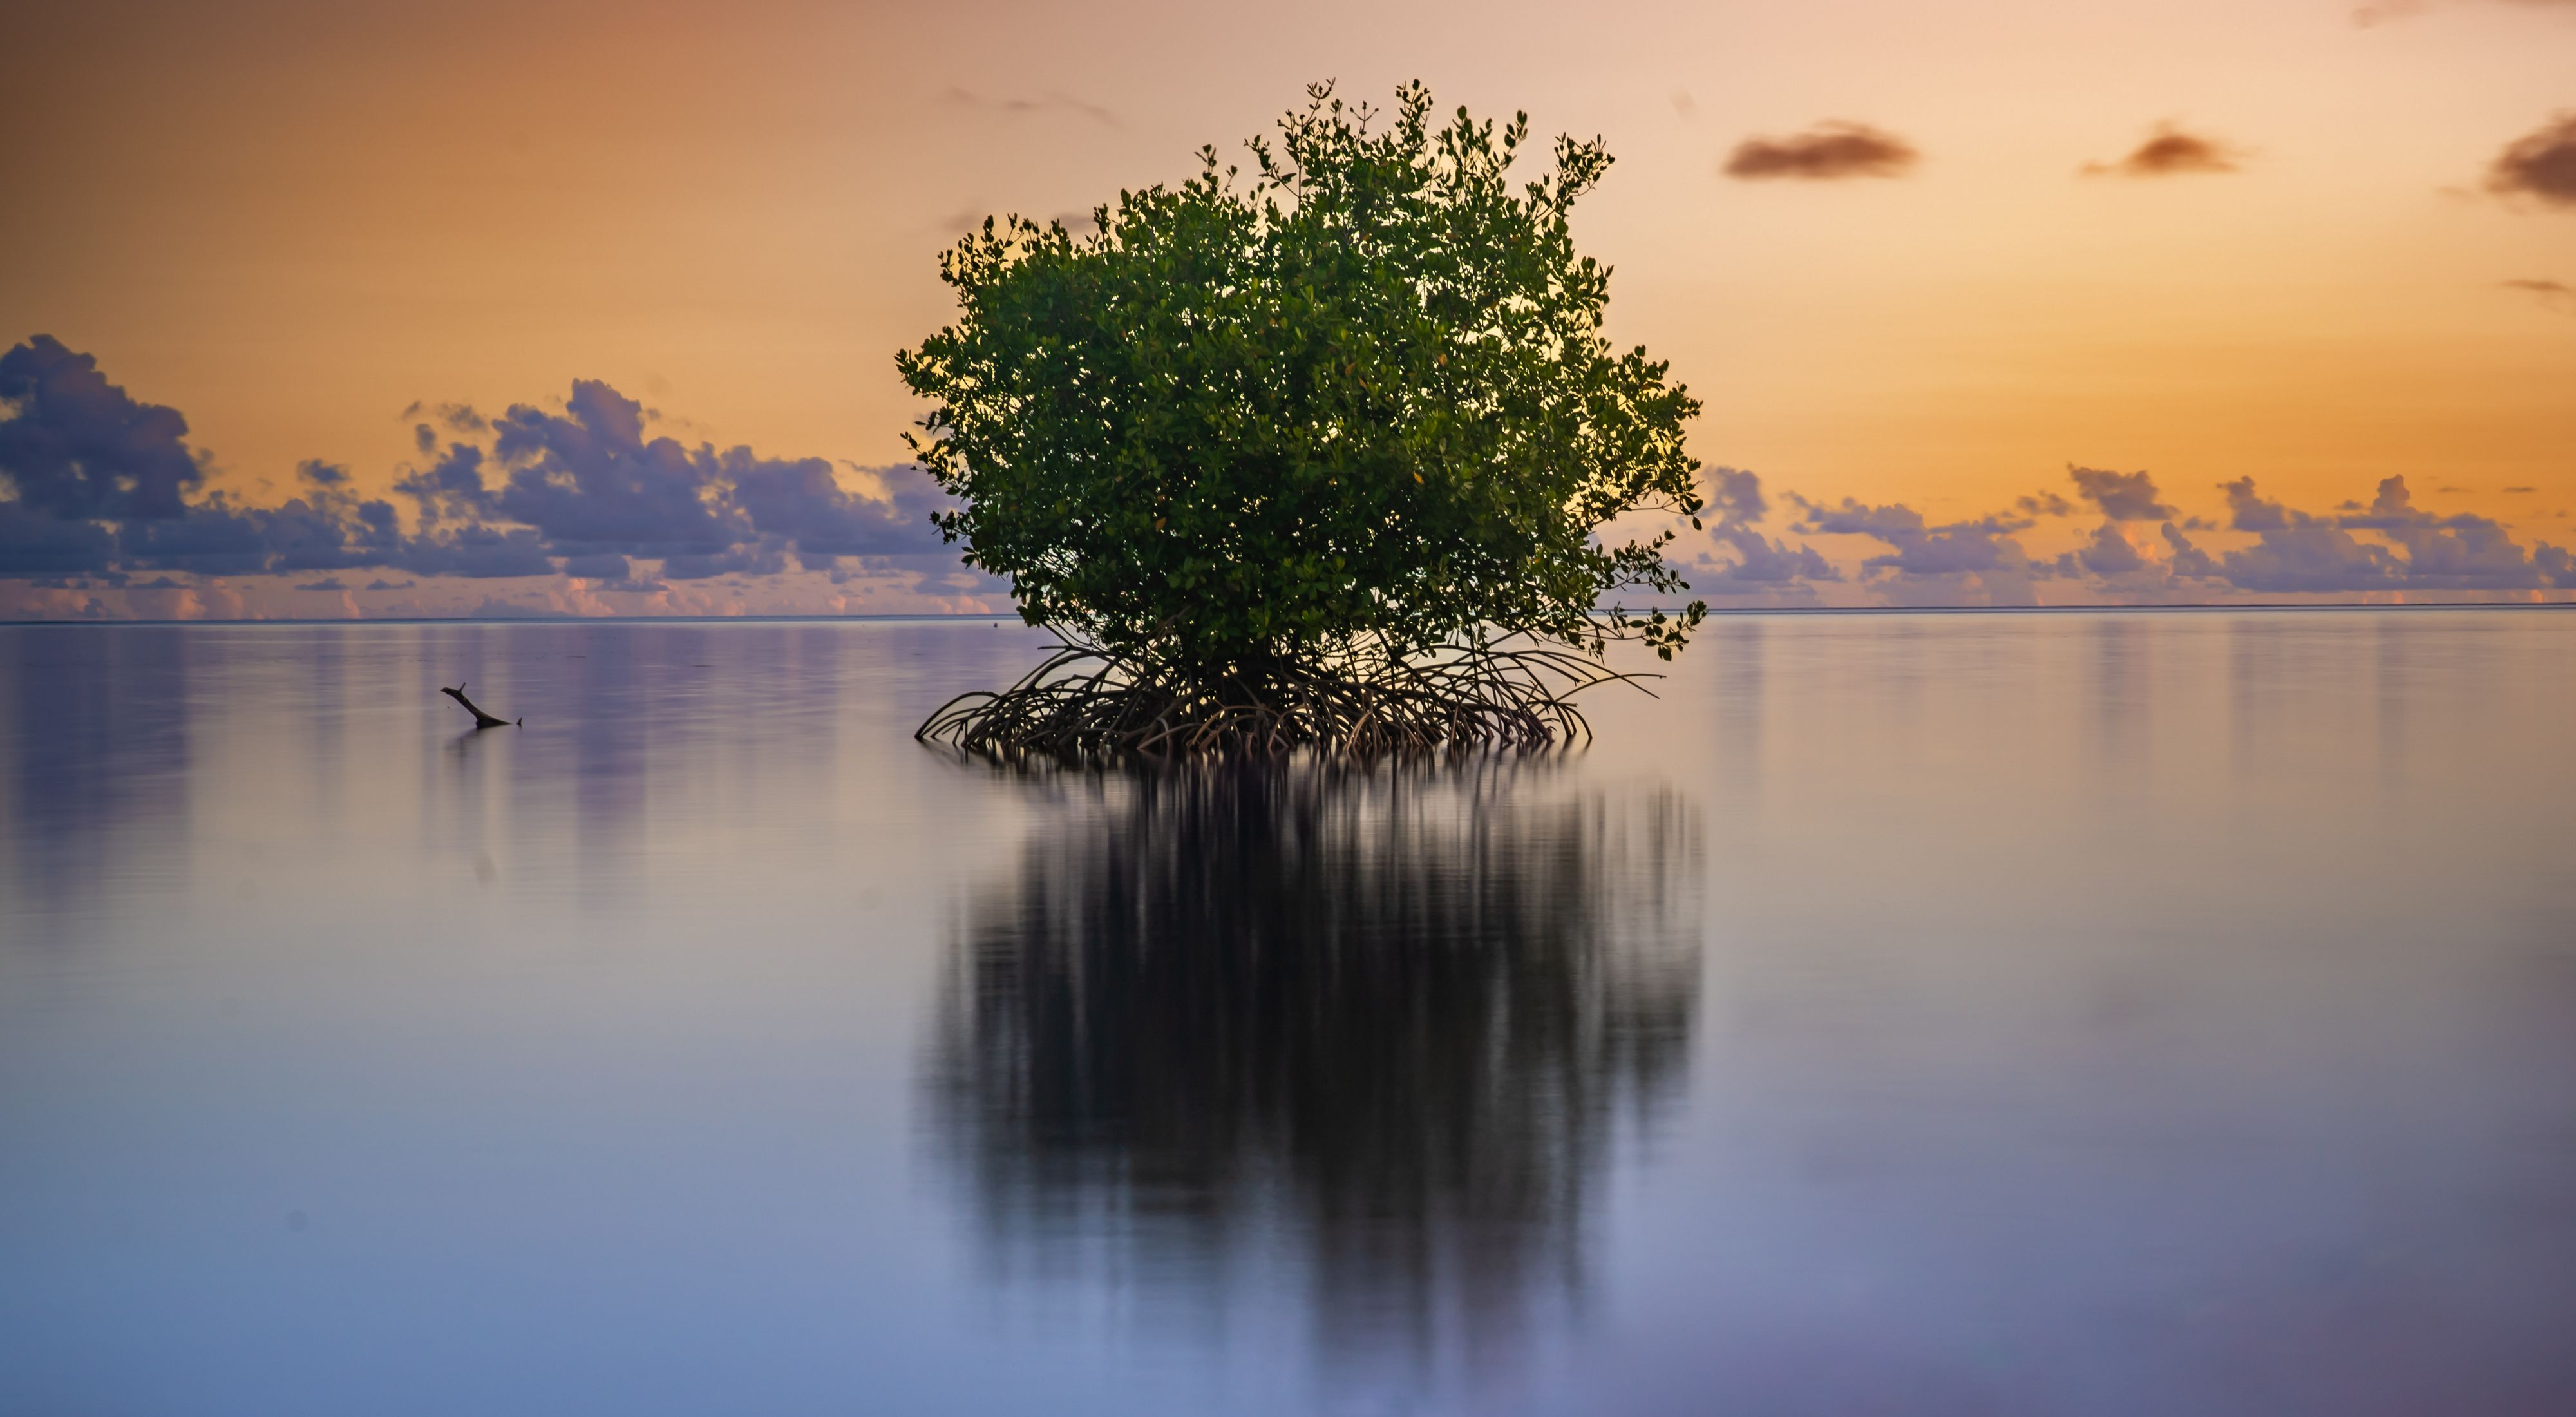 Small tree in the middle of a body of water